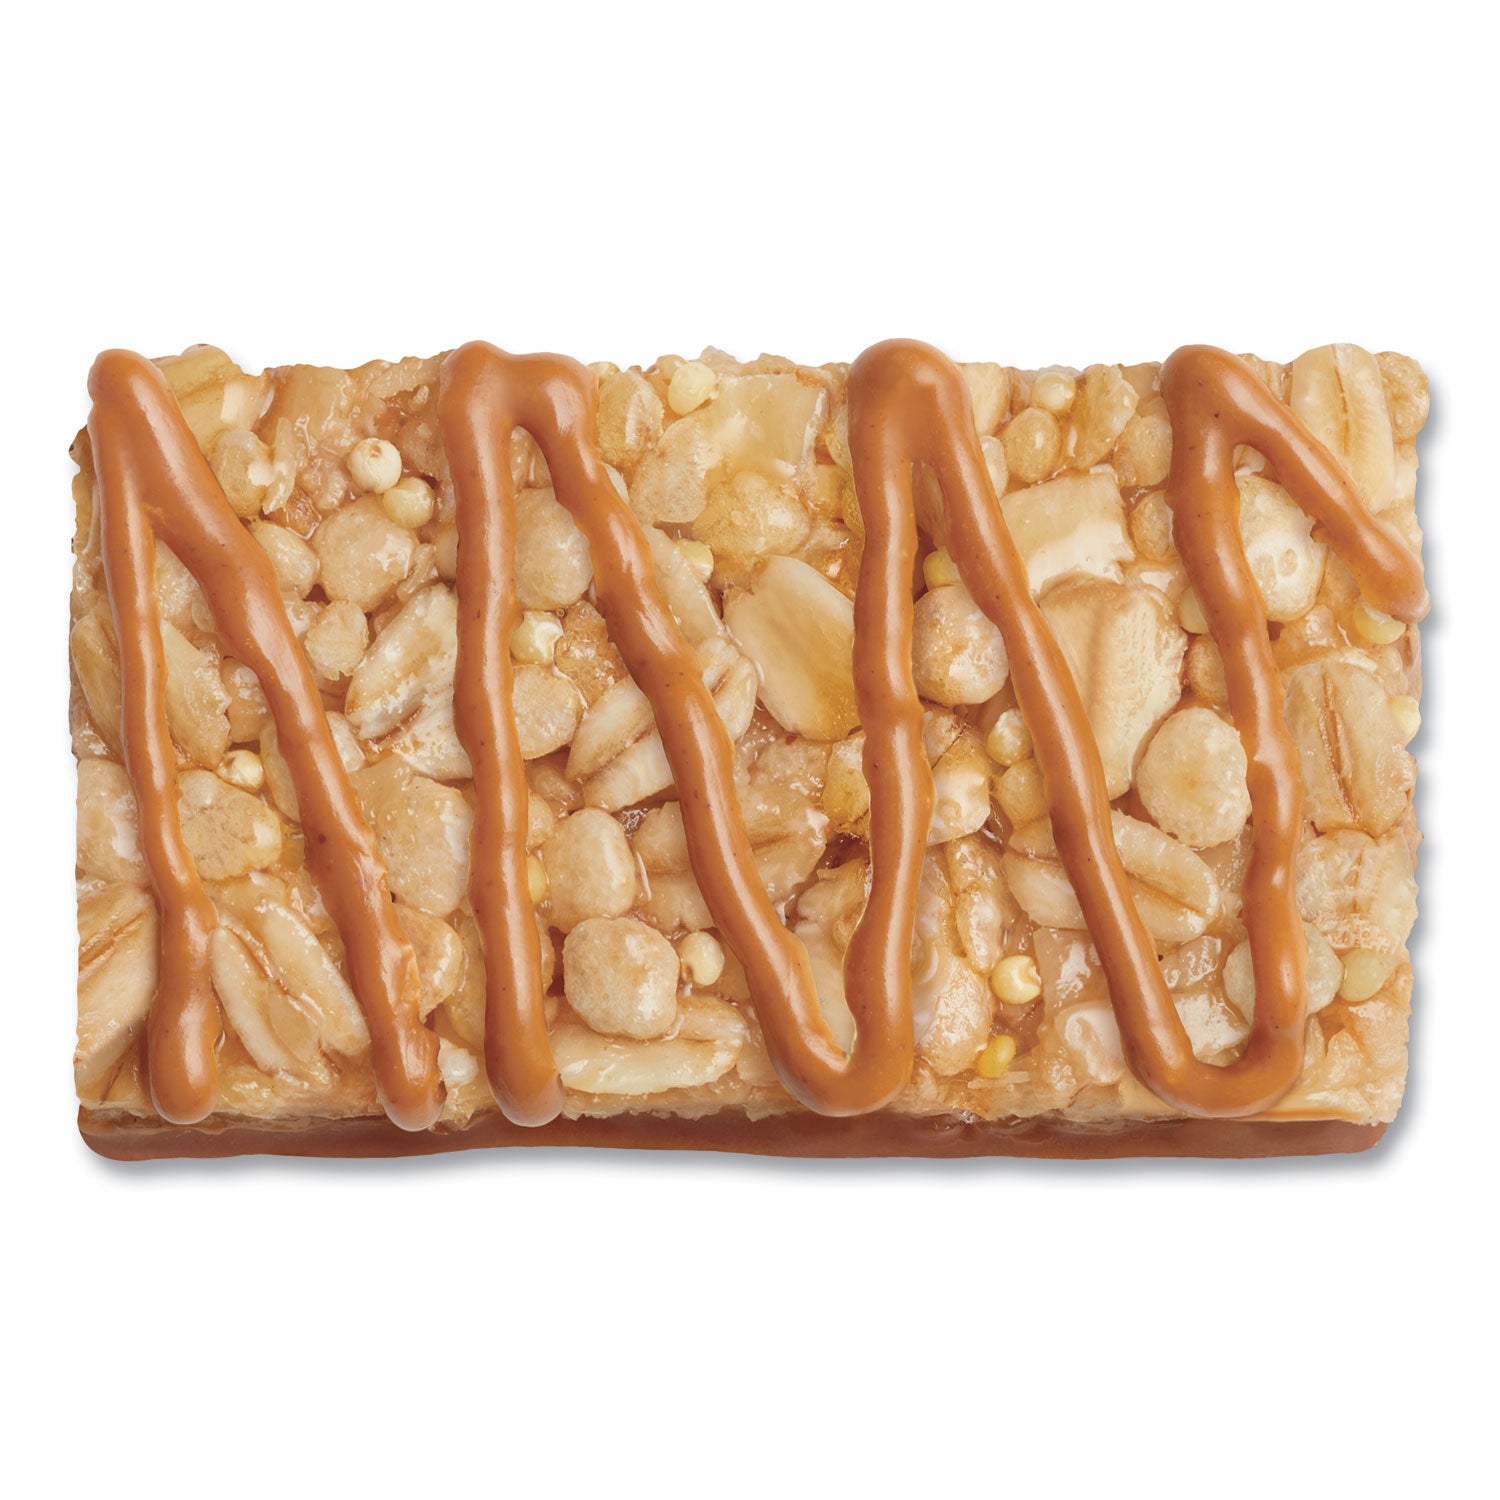 minis-chewy-peanut-butter-081-oz-10-pack_knd27895 - 4